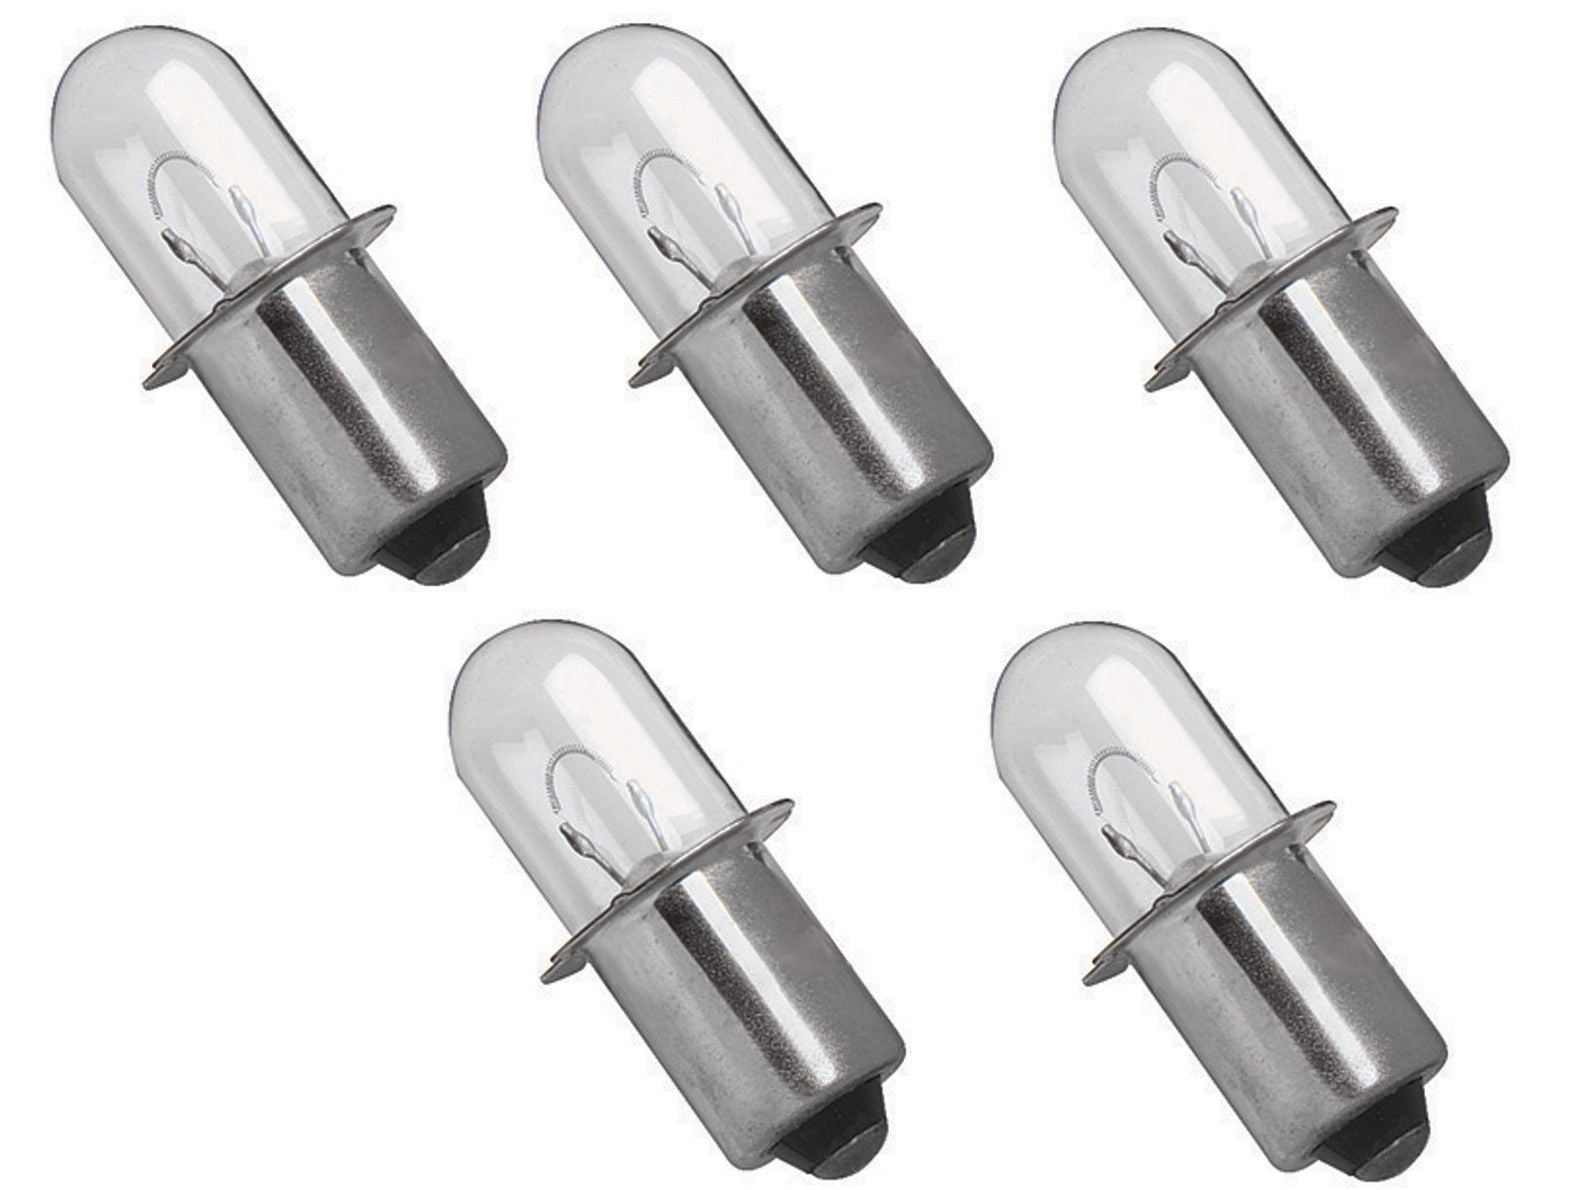 2 19.2 v Volt Xenon Flashlight Replacement Bulbs for Porter Cable #881 #8419 